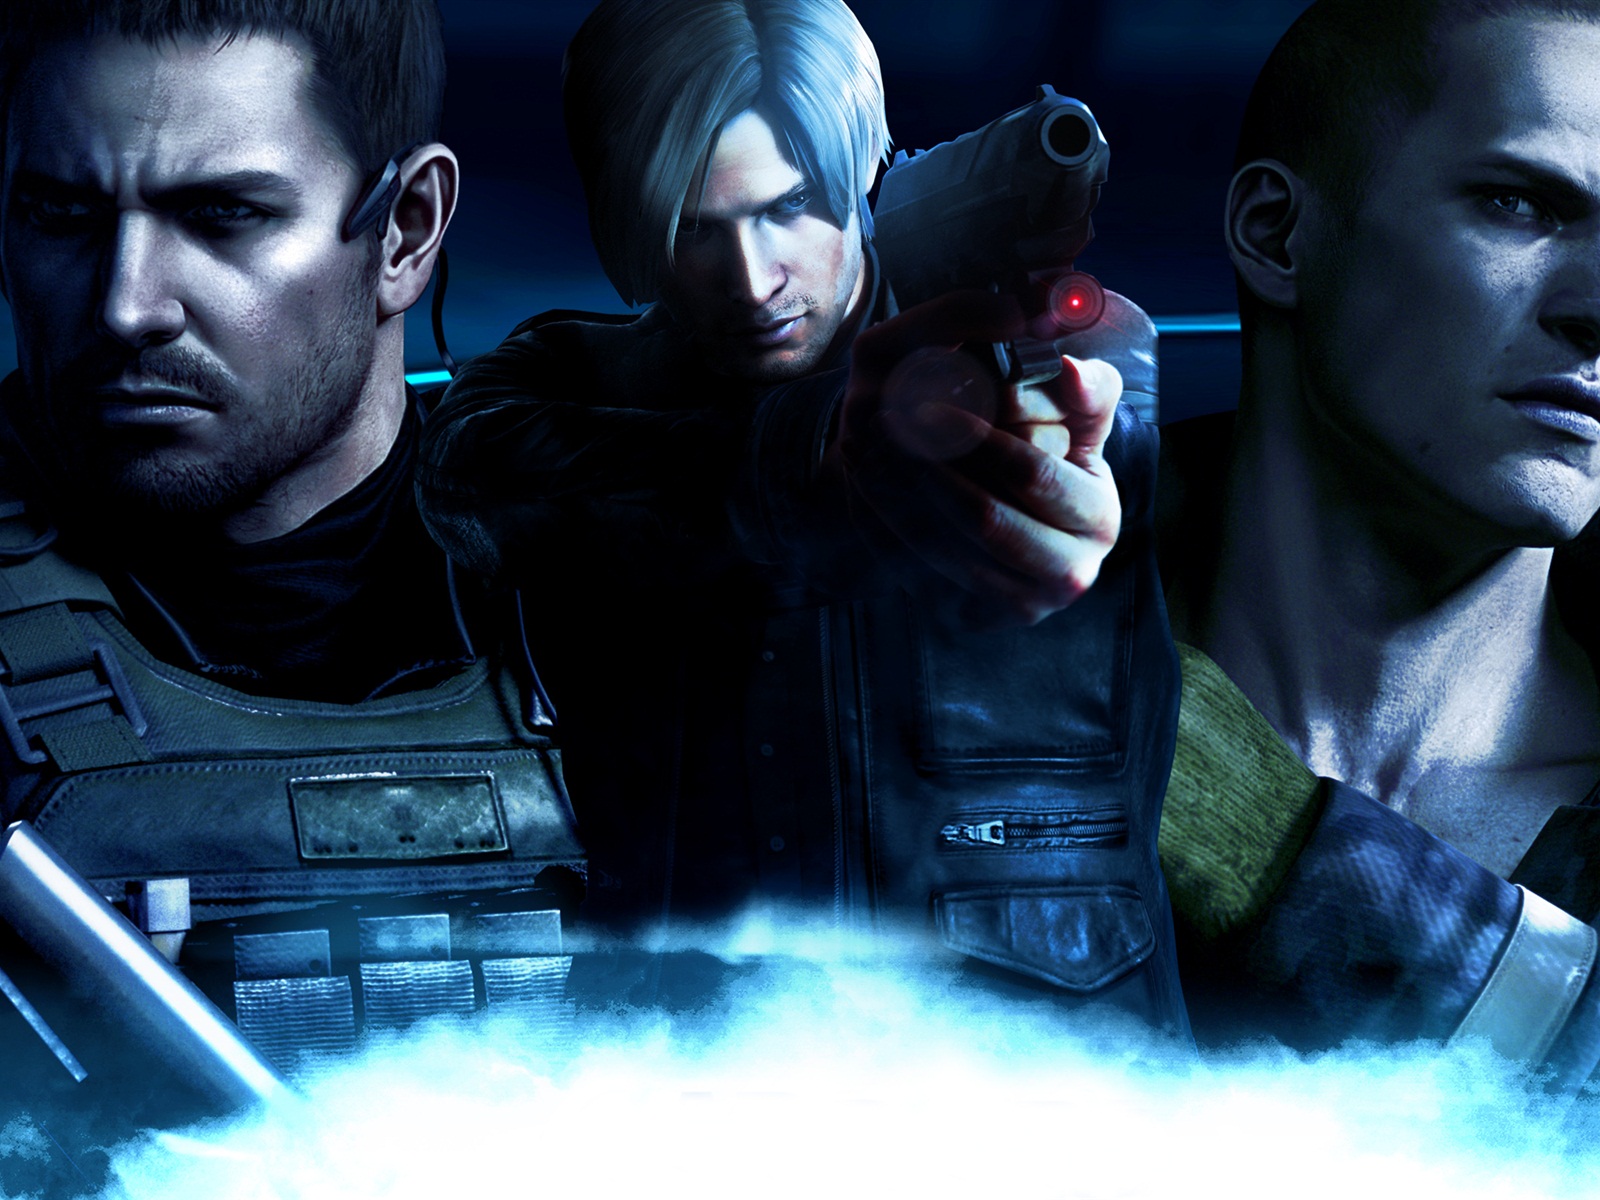 Resident Evil 6 HD game wallpapers #6 - 1600x1200